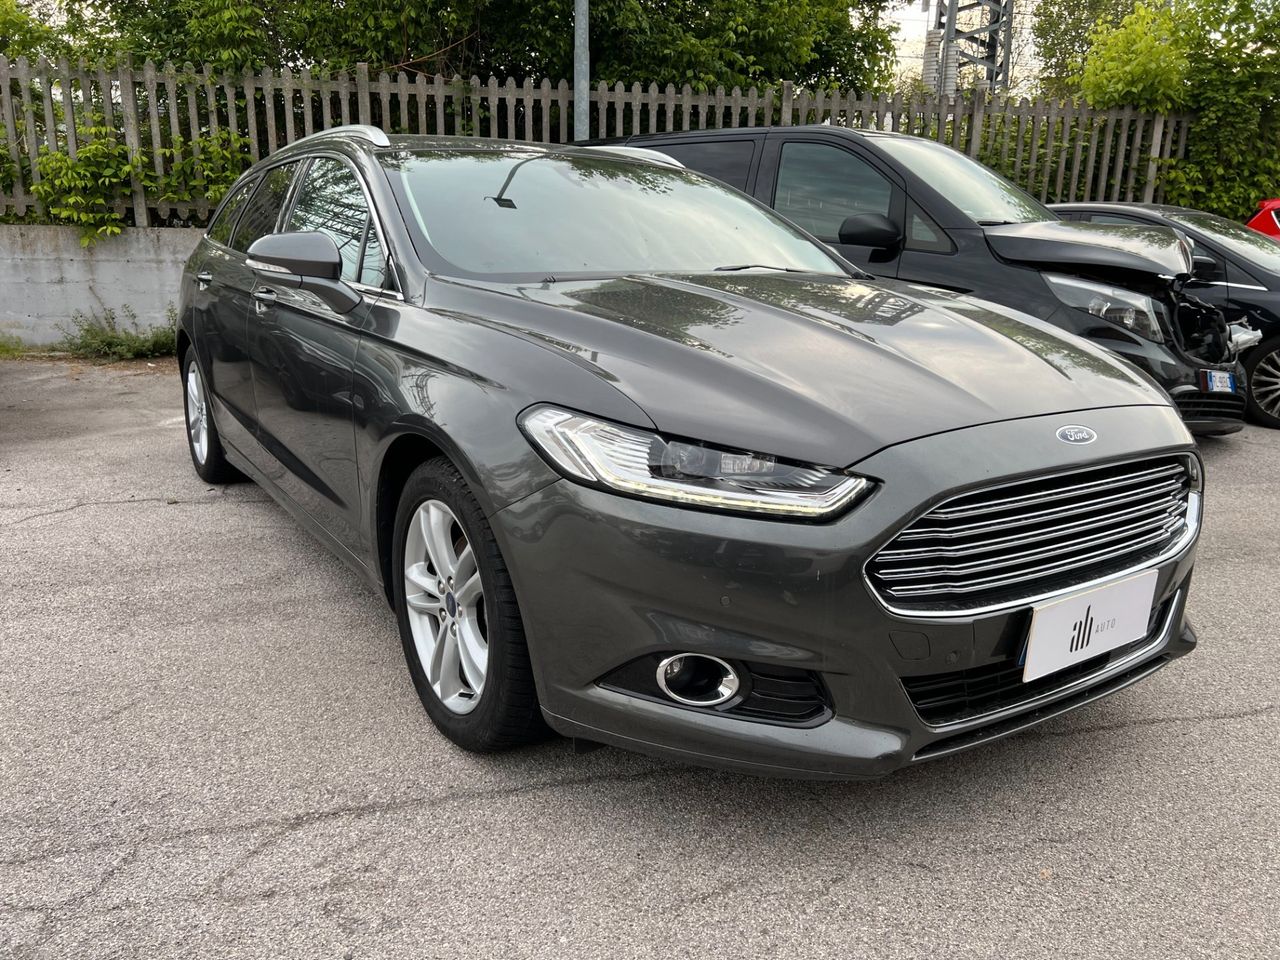 Ford Mondeo 2.0 TDCi 150 CV S&S Powershift SW ST-Line Business